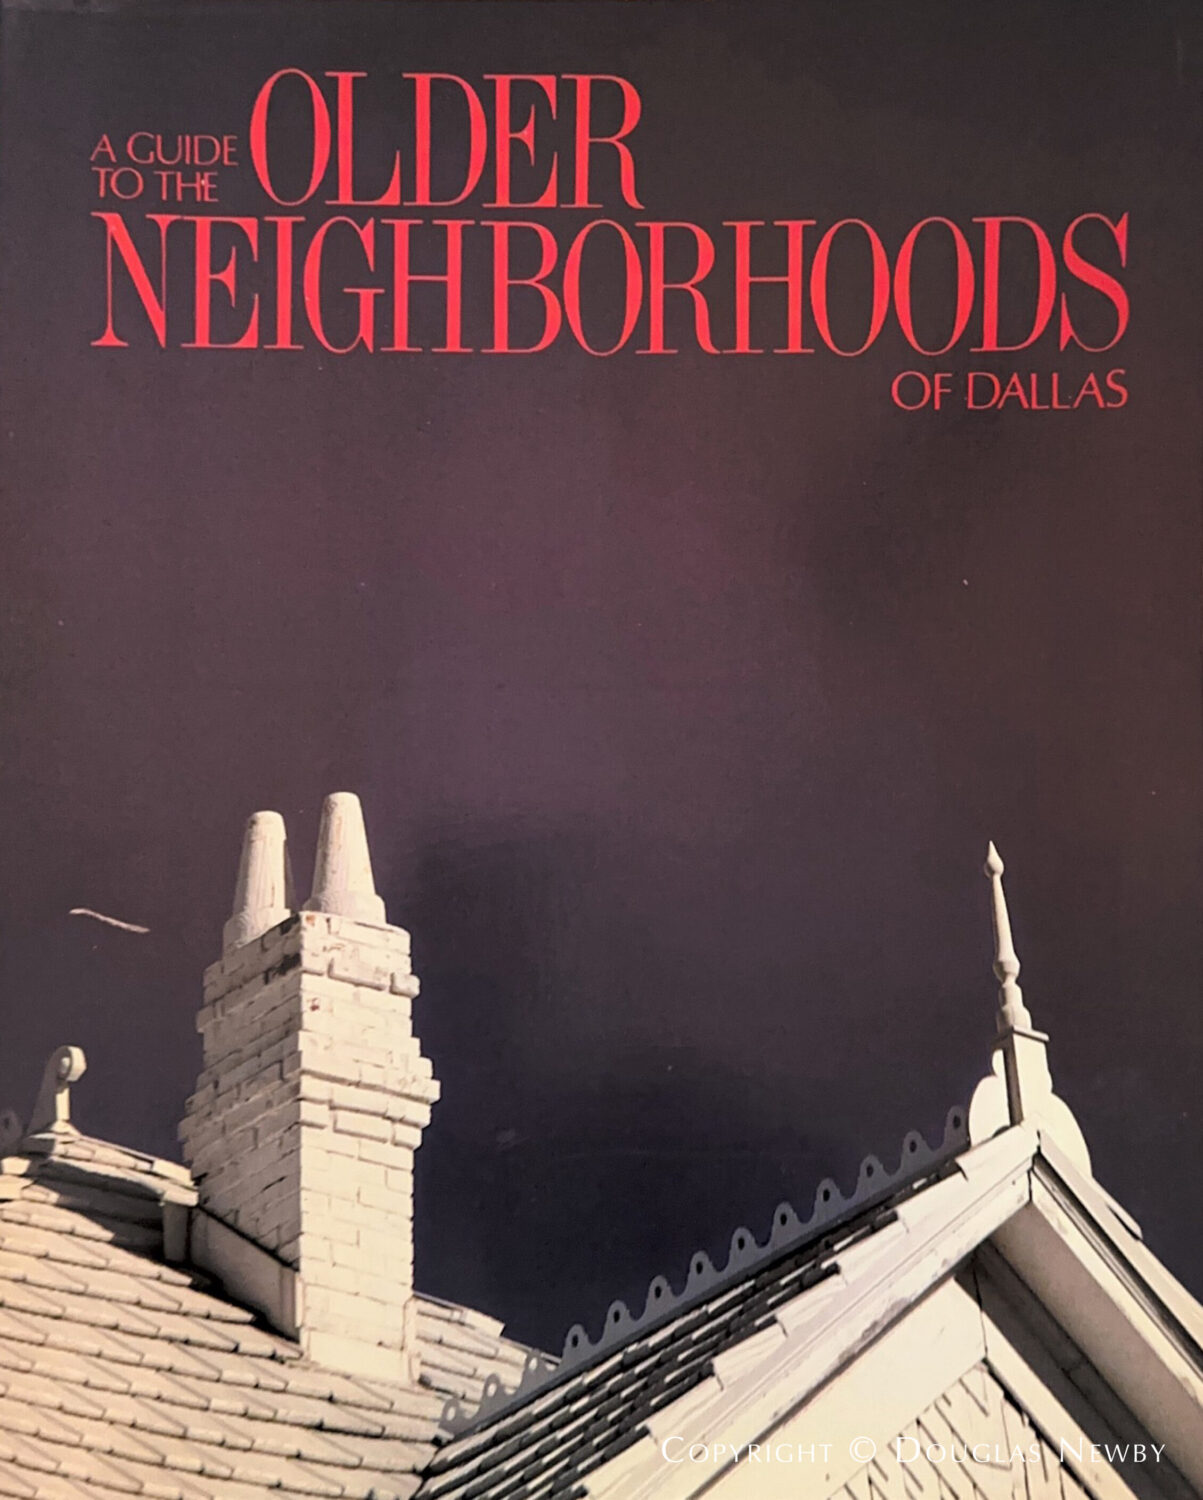 A Guide to the Older Neighborhoods of Dallas book written by Douglas Newby, Chairman of Historic Preservation League Book Committee